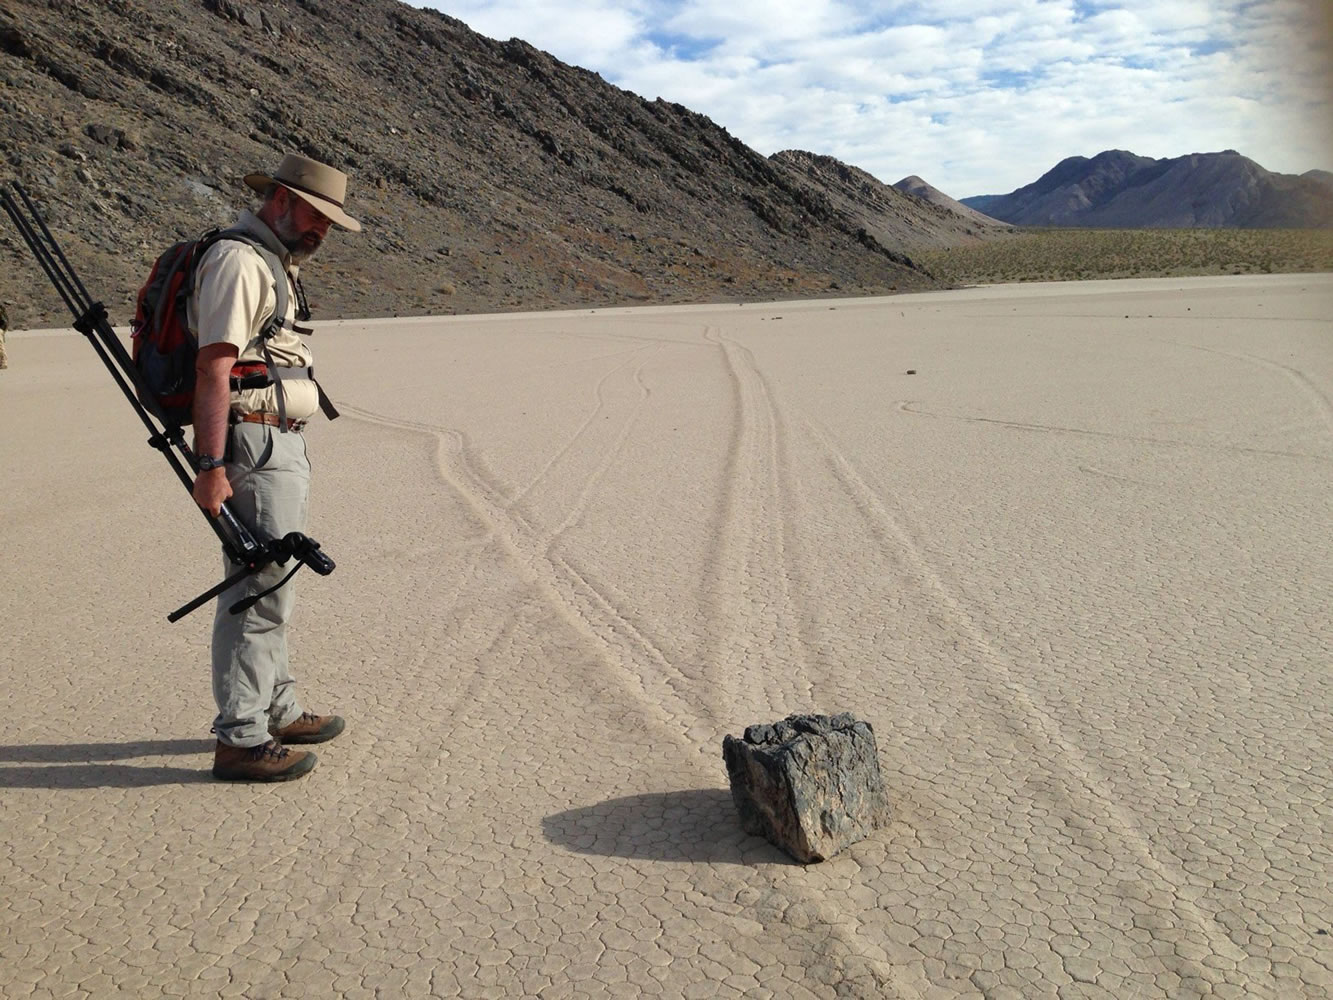 Richard Norris surveys one of several hundred rocks that have left trails as they moved across the surface of Racetrack Playa in California's Death Valley National Park on Aug. 18.